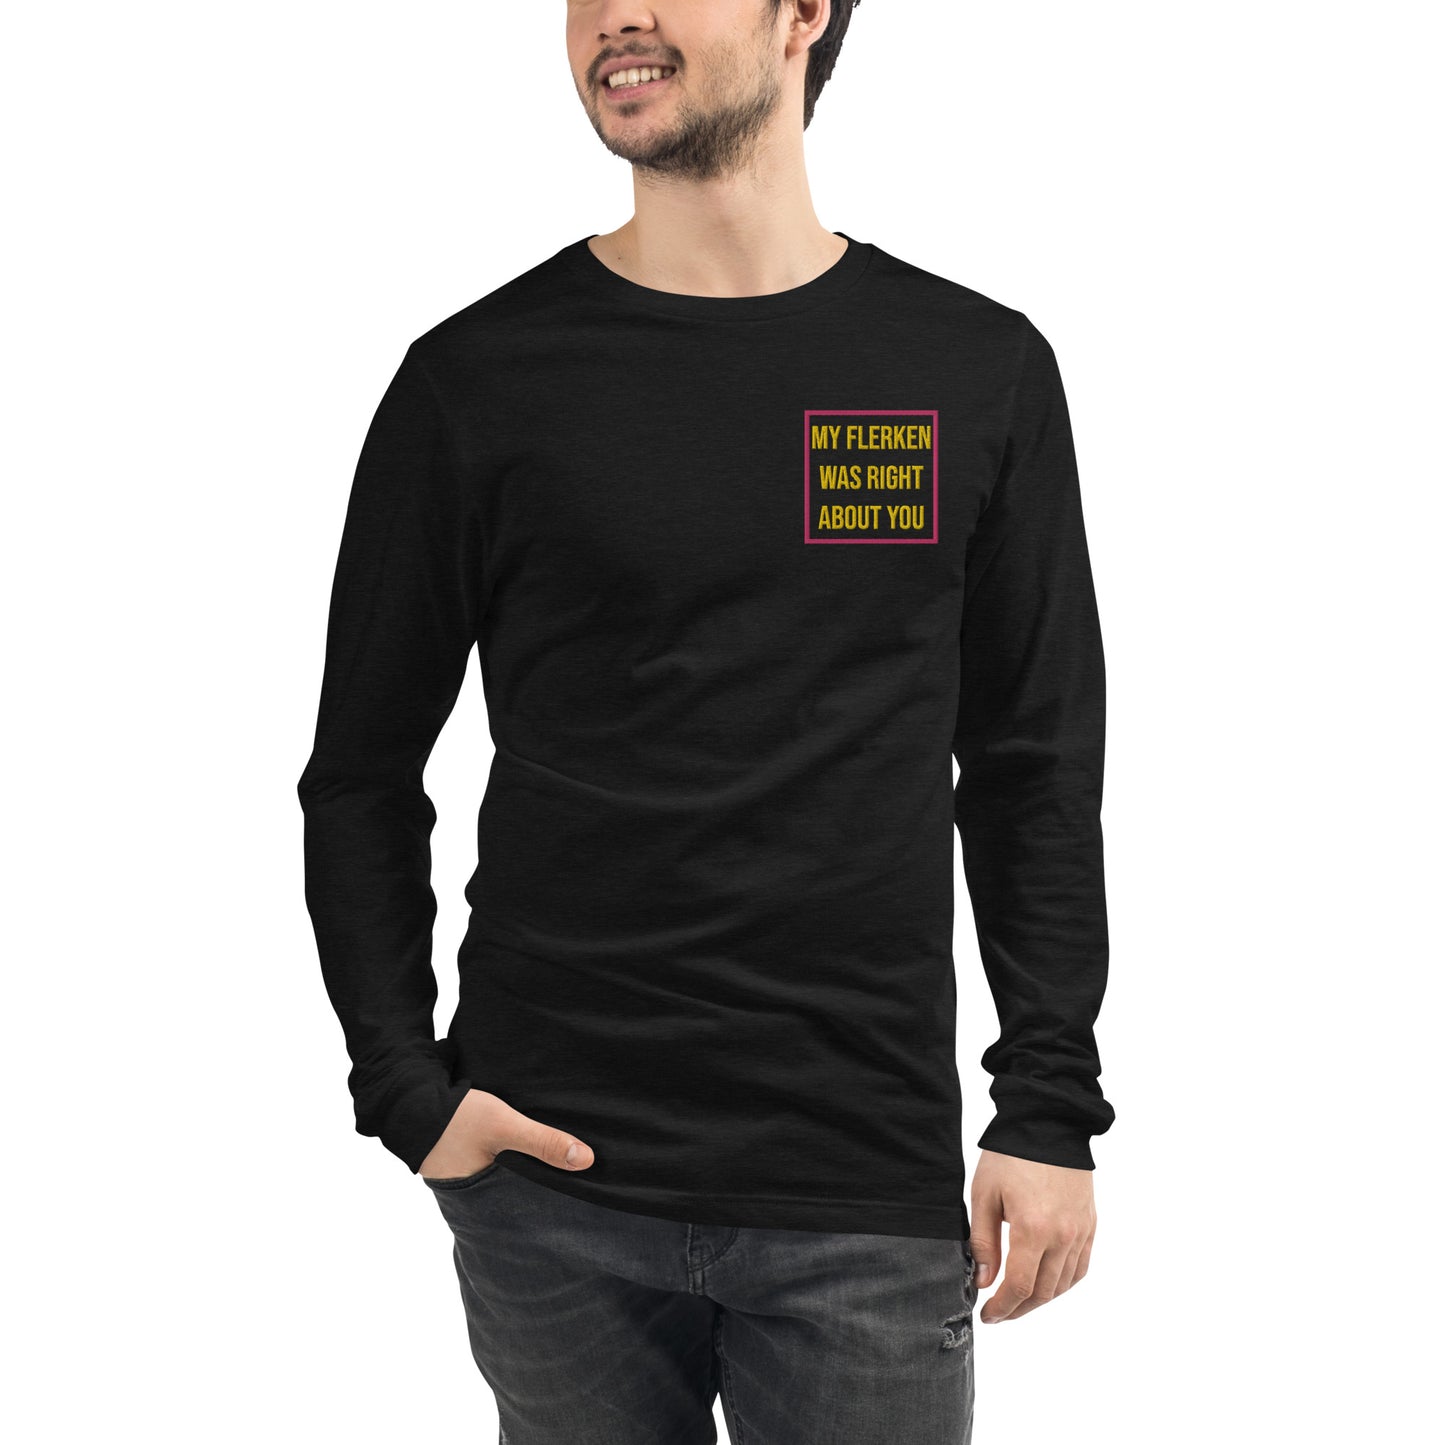 "My Flerken" Was Right About You Embroidered Long Sleeve Tee